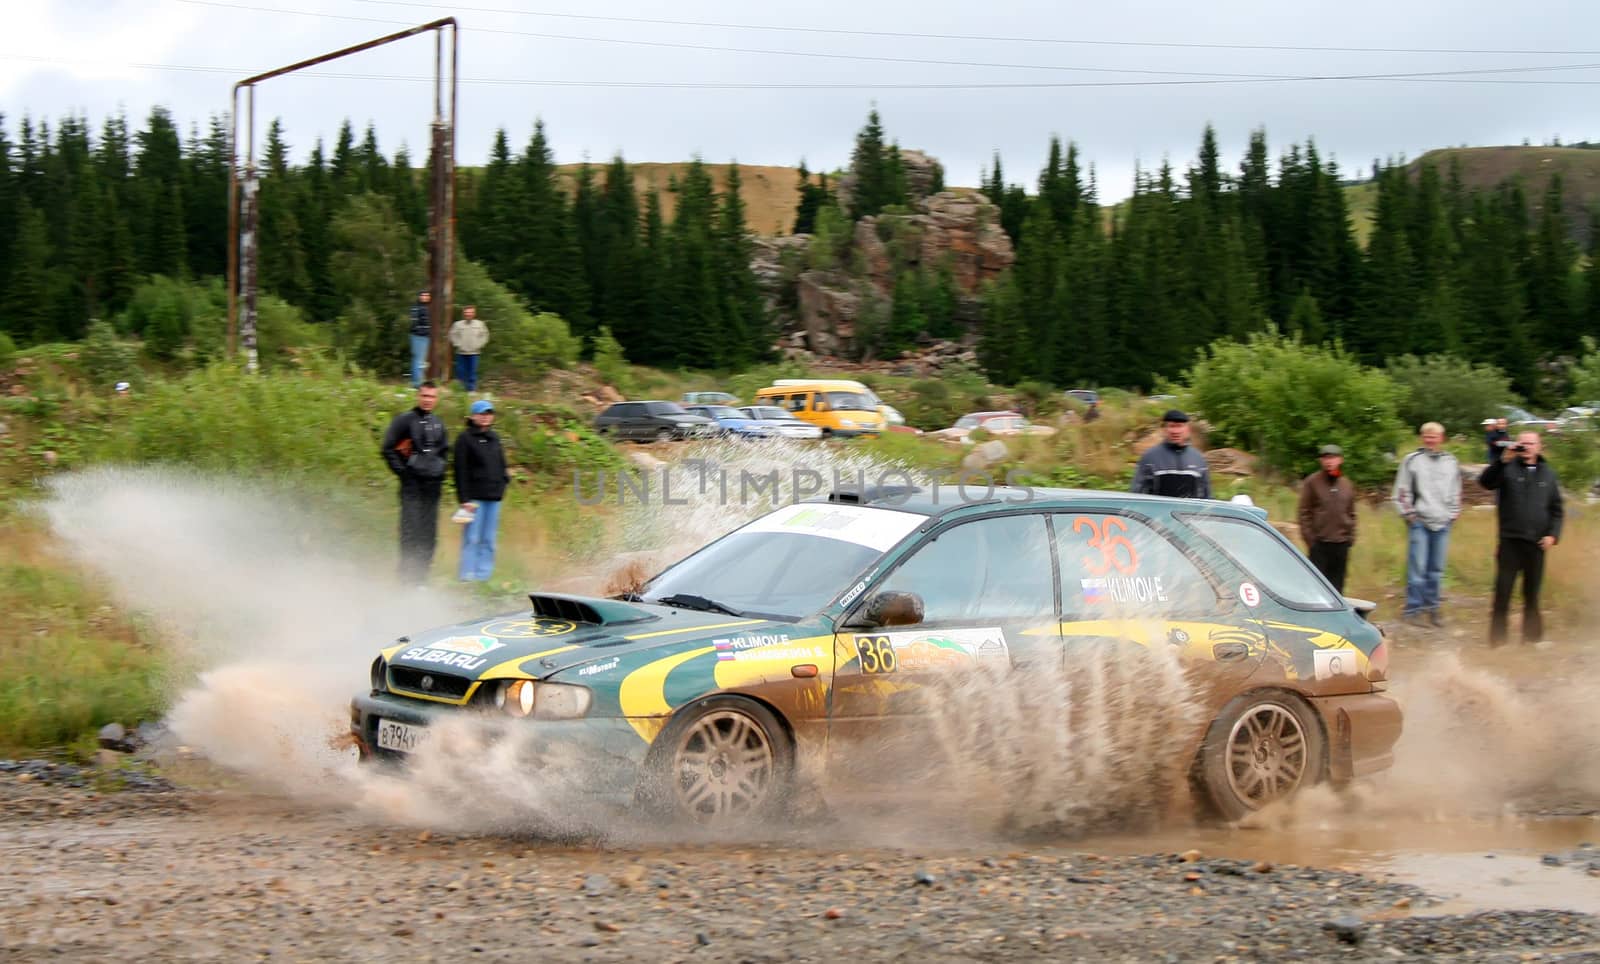 BAKAL, RUSSIA - AUGUST 8: Evgeniy Klimov's Subaru Impreza (No. 36) competes at the annual Rally Southern Ural on August 8, 2009 in Bakal, Satka district, Chelyabinsk region, Russia.